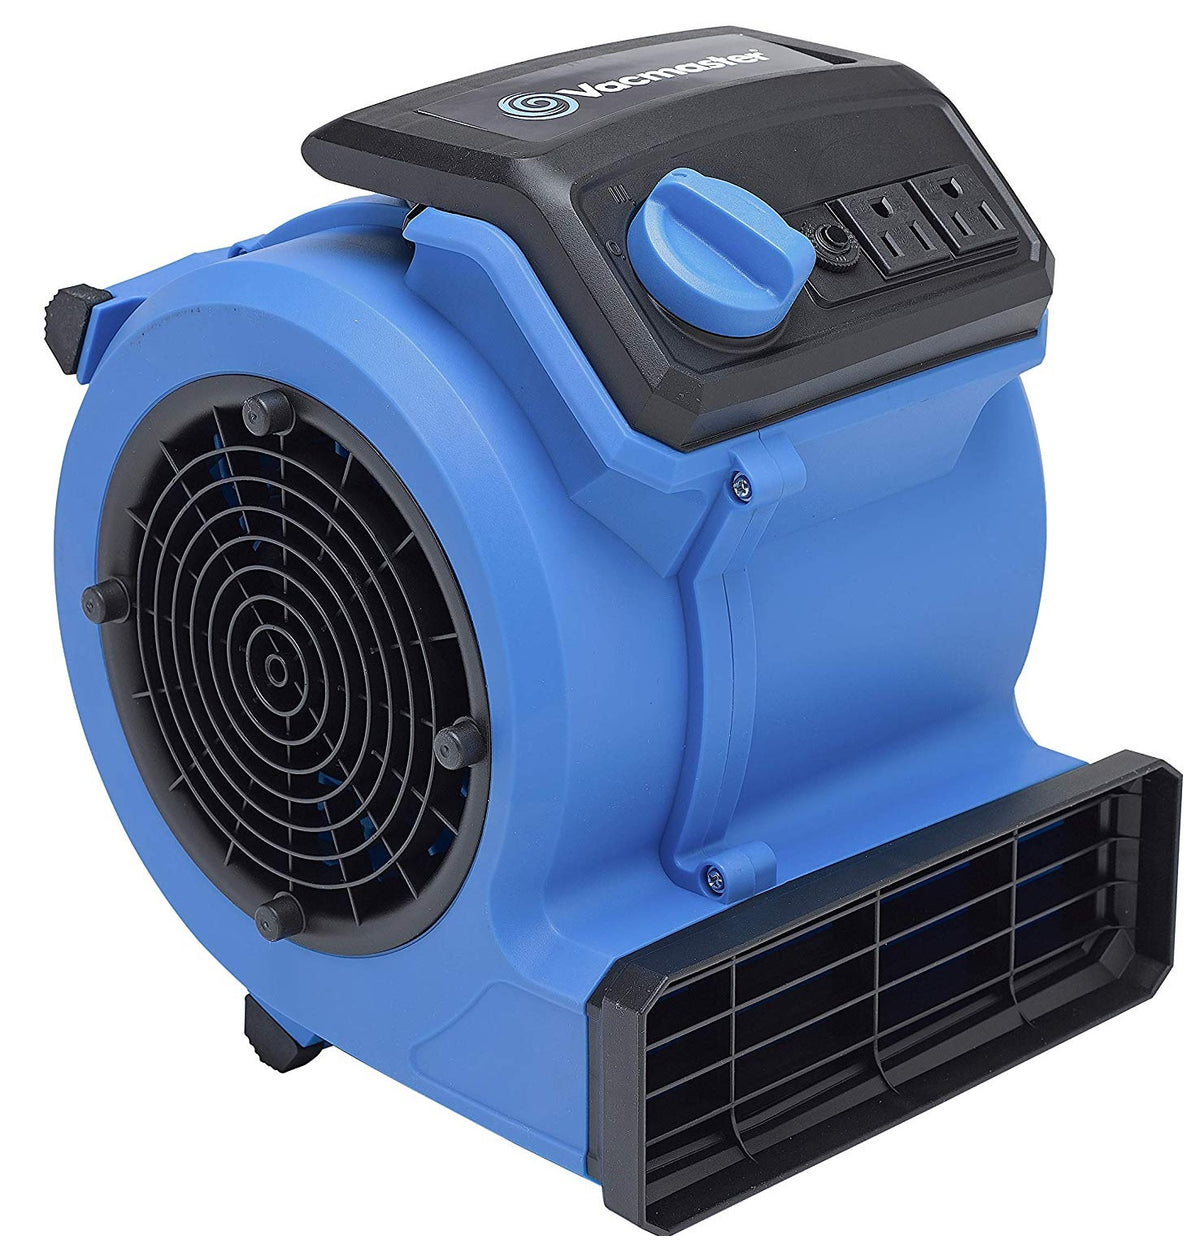 Vacmaster AM201 0101 Portable Air Mover, 550 CFM